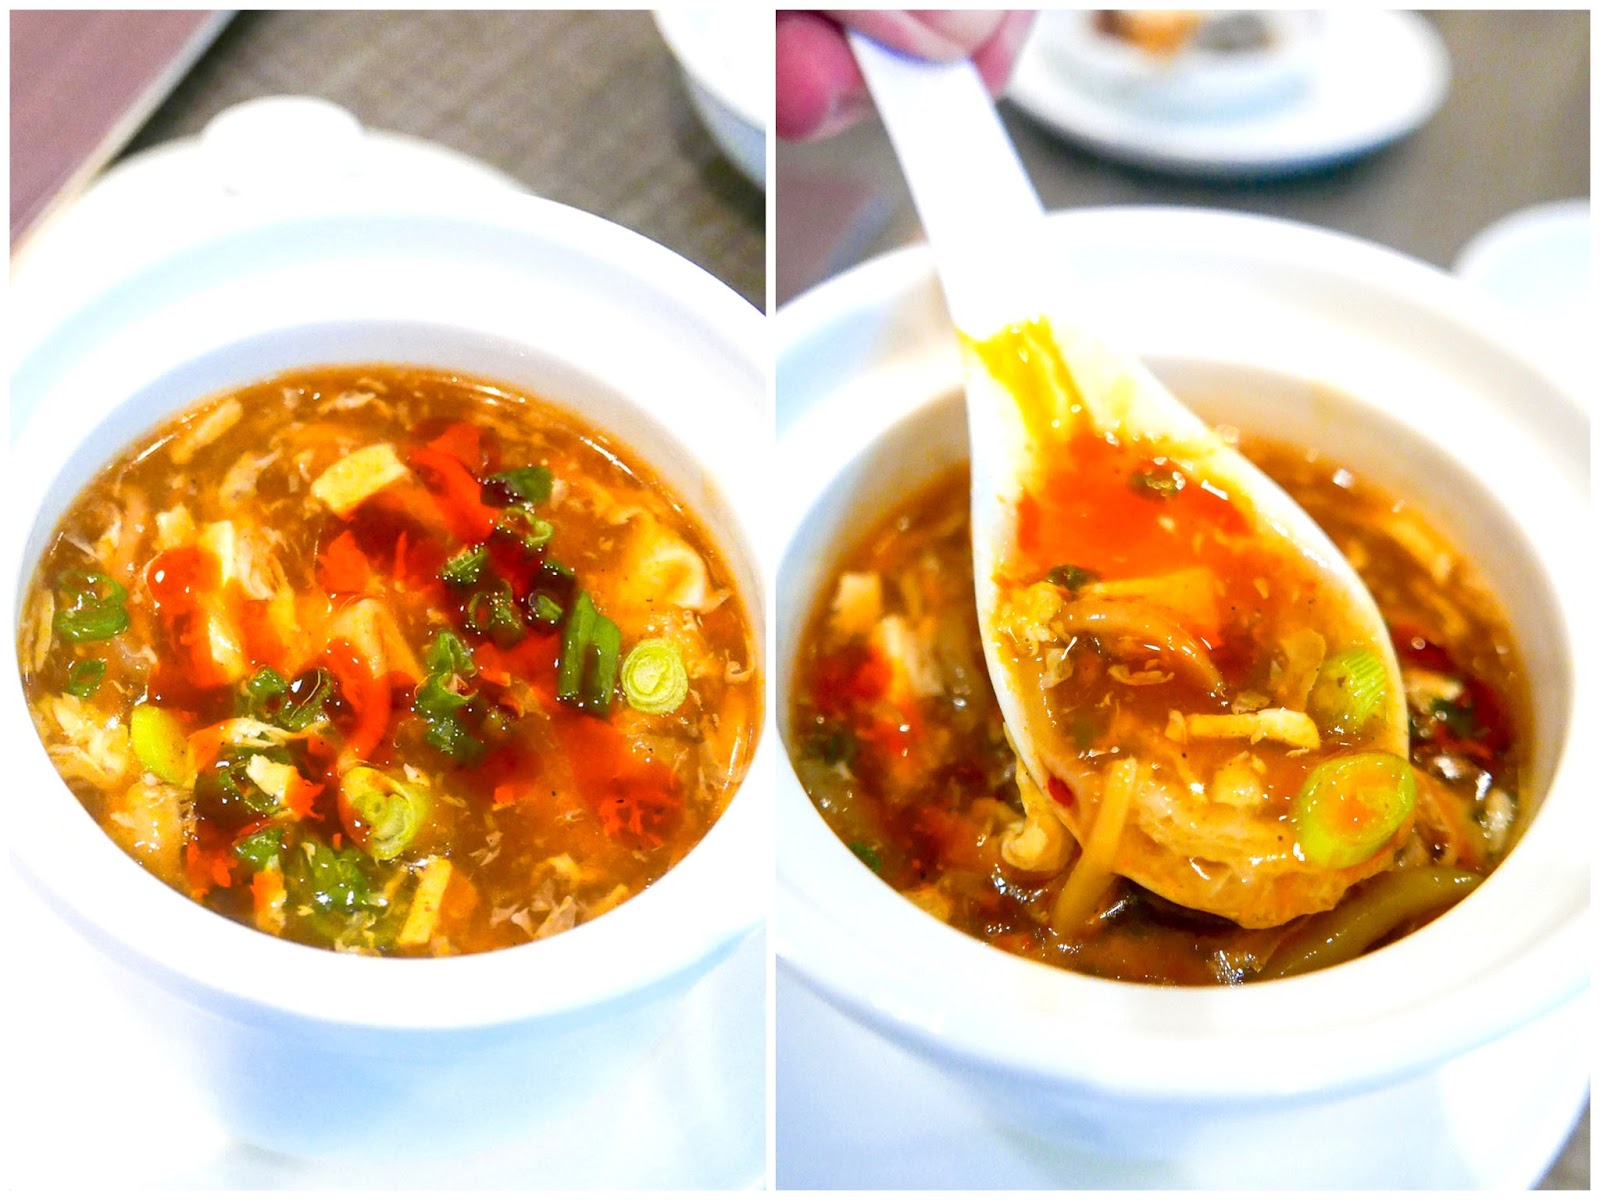 4. Sino Scene - sweet sour birds nest and crab soup